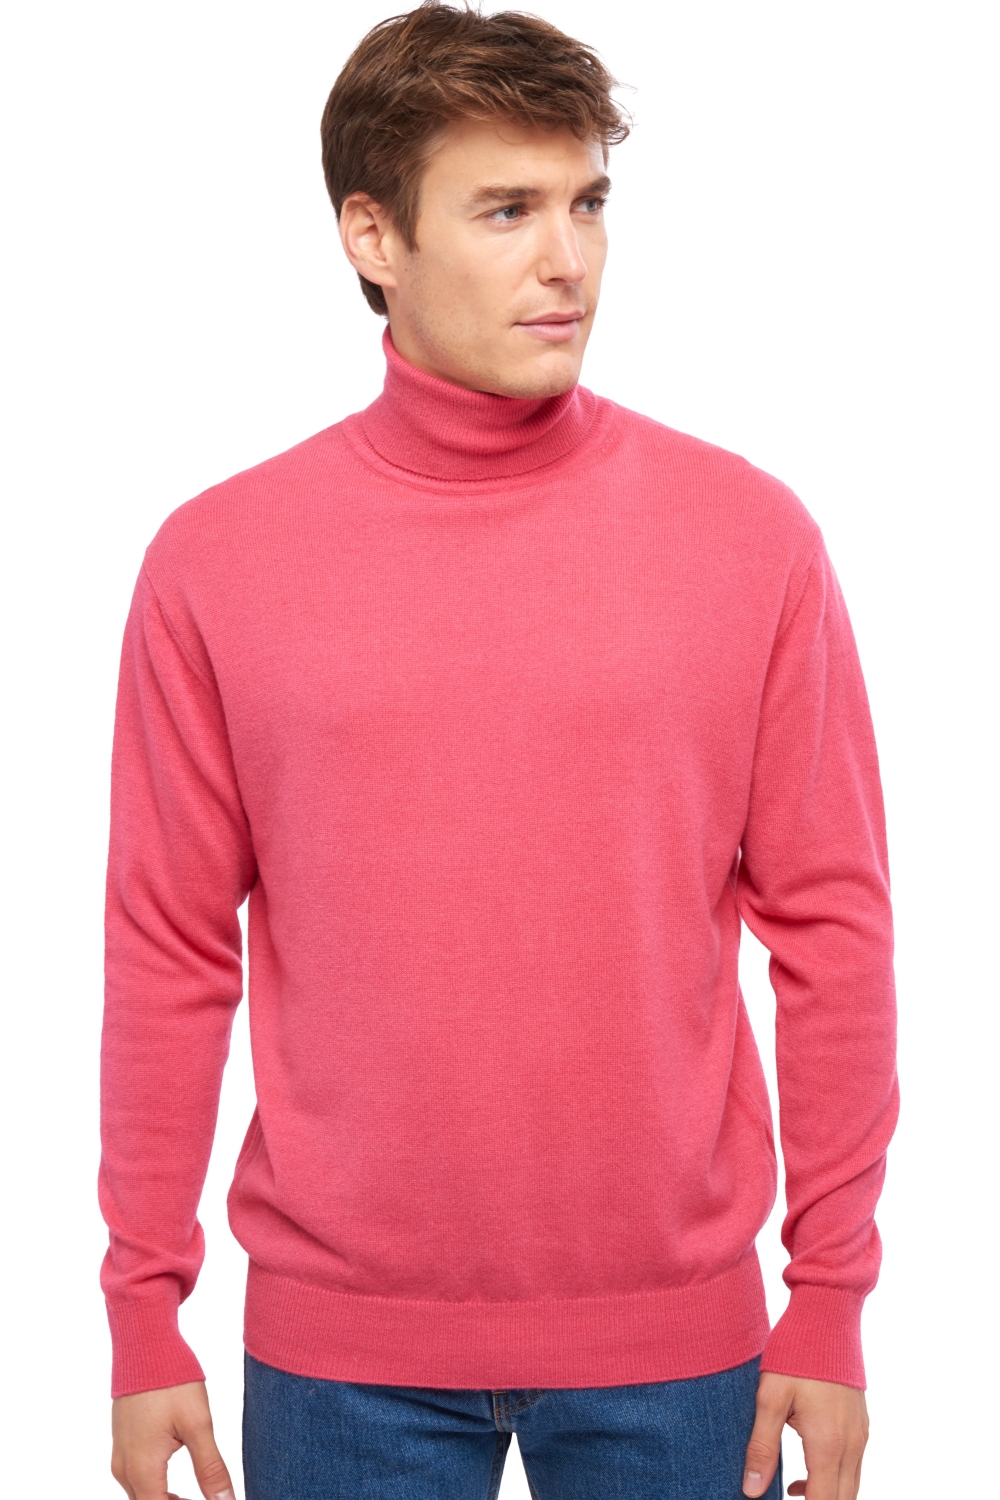 Cachemire pull homme col roule edgar rose shocking l